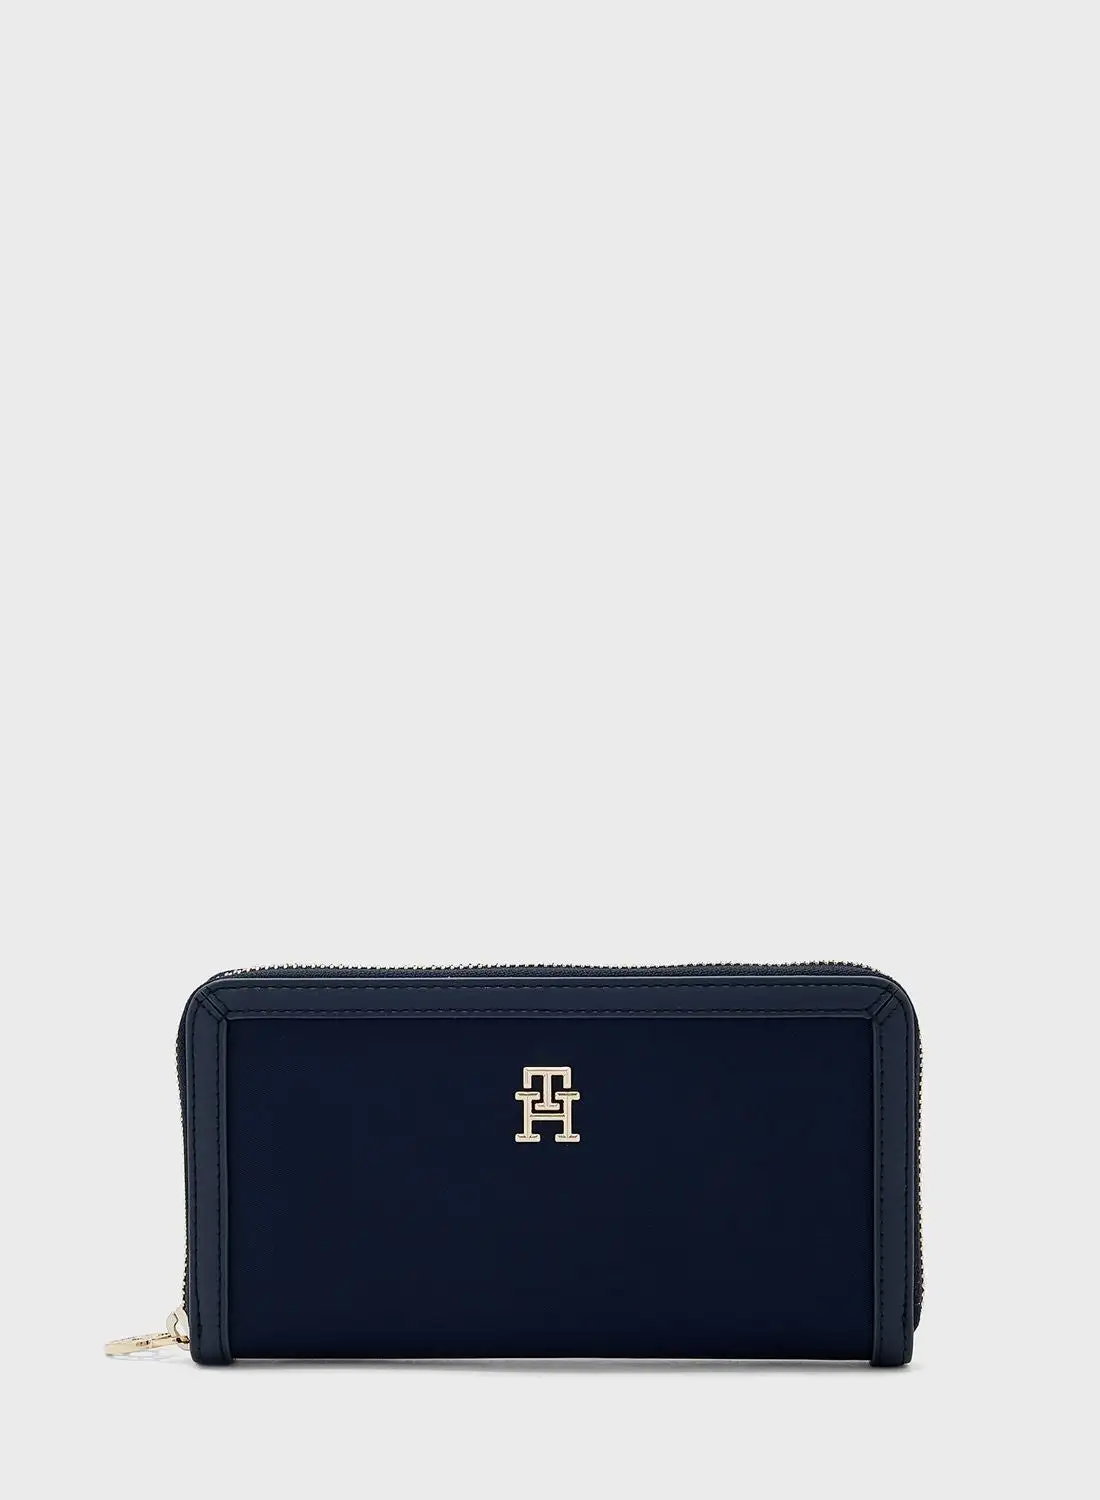 TOMMY HILFIGER Essential Flap City Compact Wallet